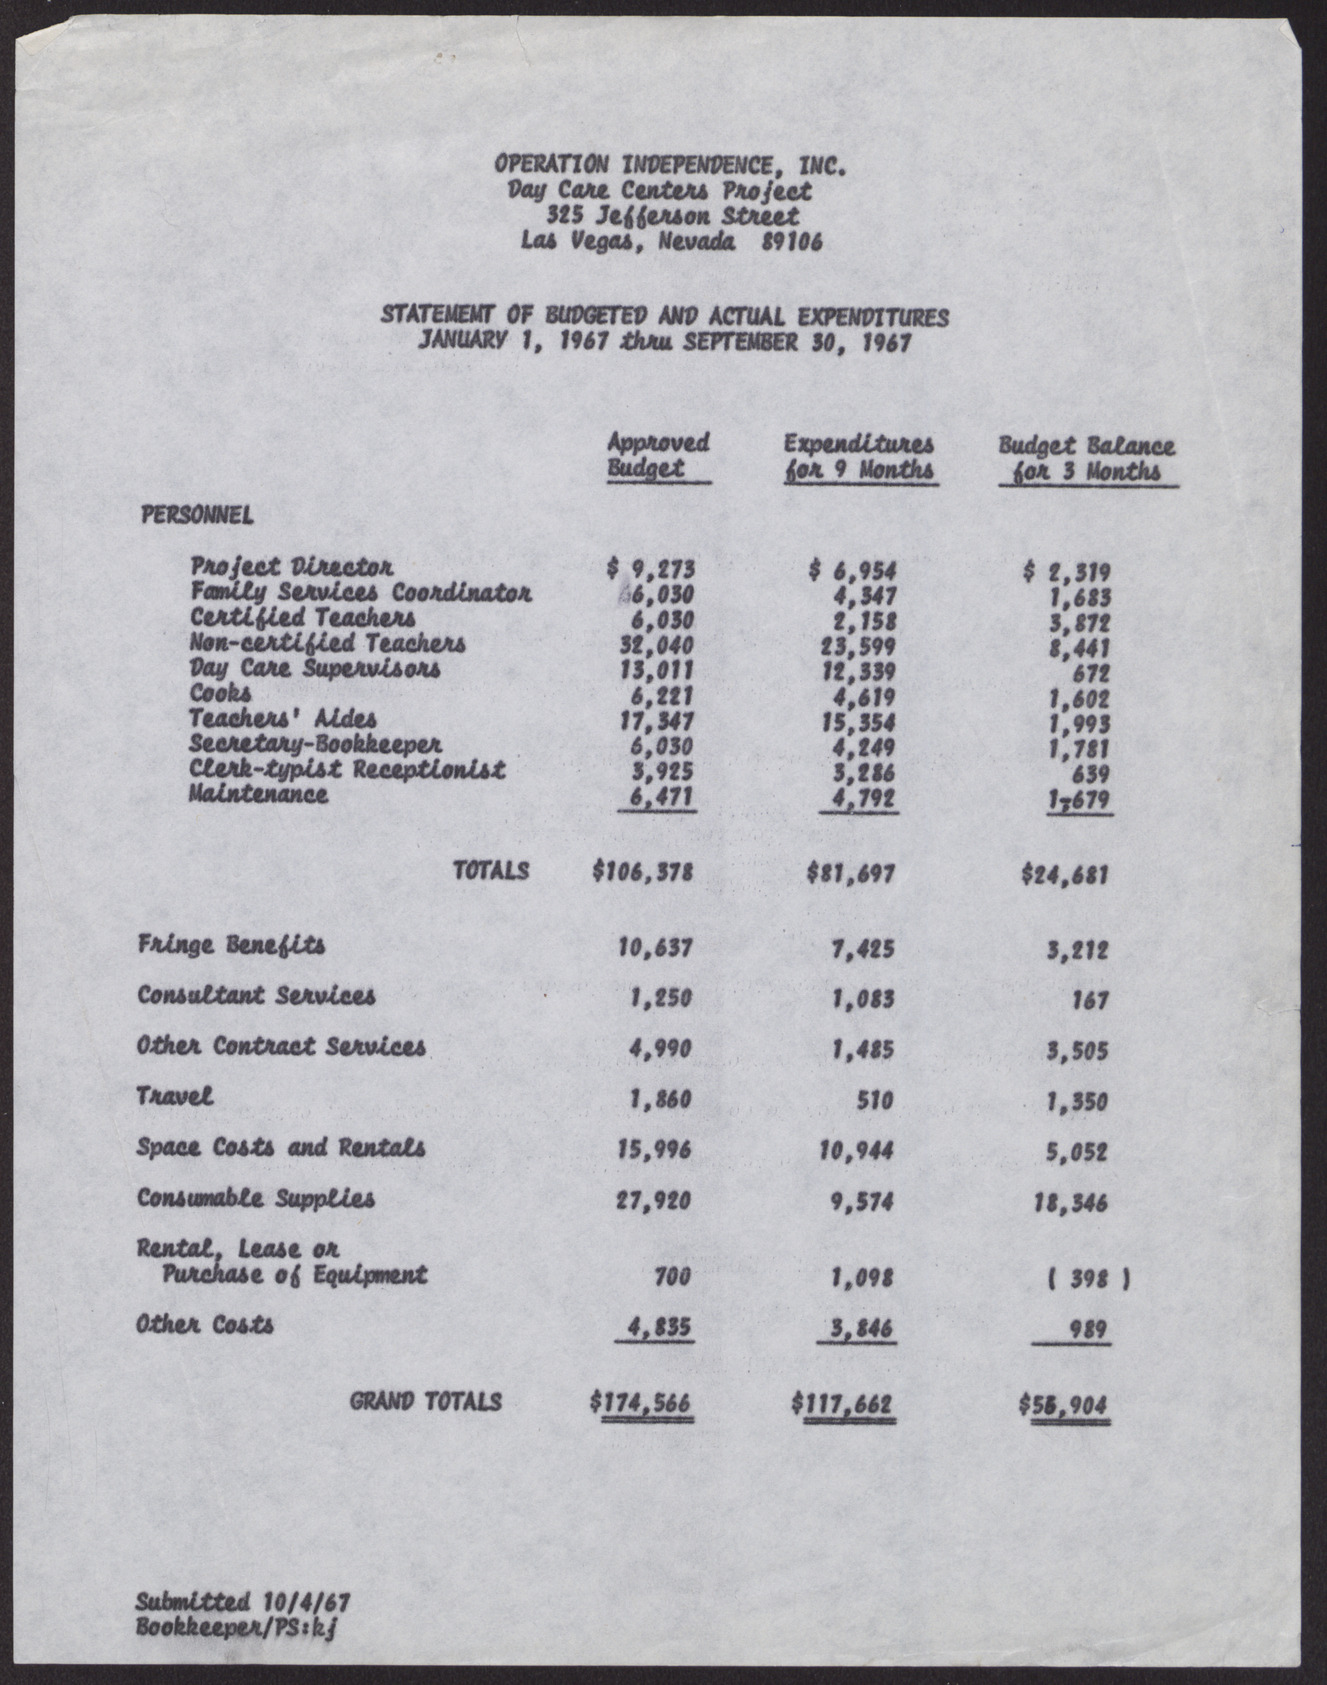 Operation Independence Incorporated Day Care Centers Project Statement of Budgeted and Actual Expenditures, January 1 to September 30, 1967